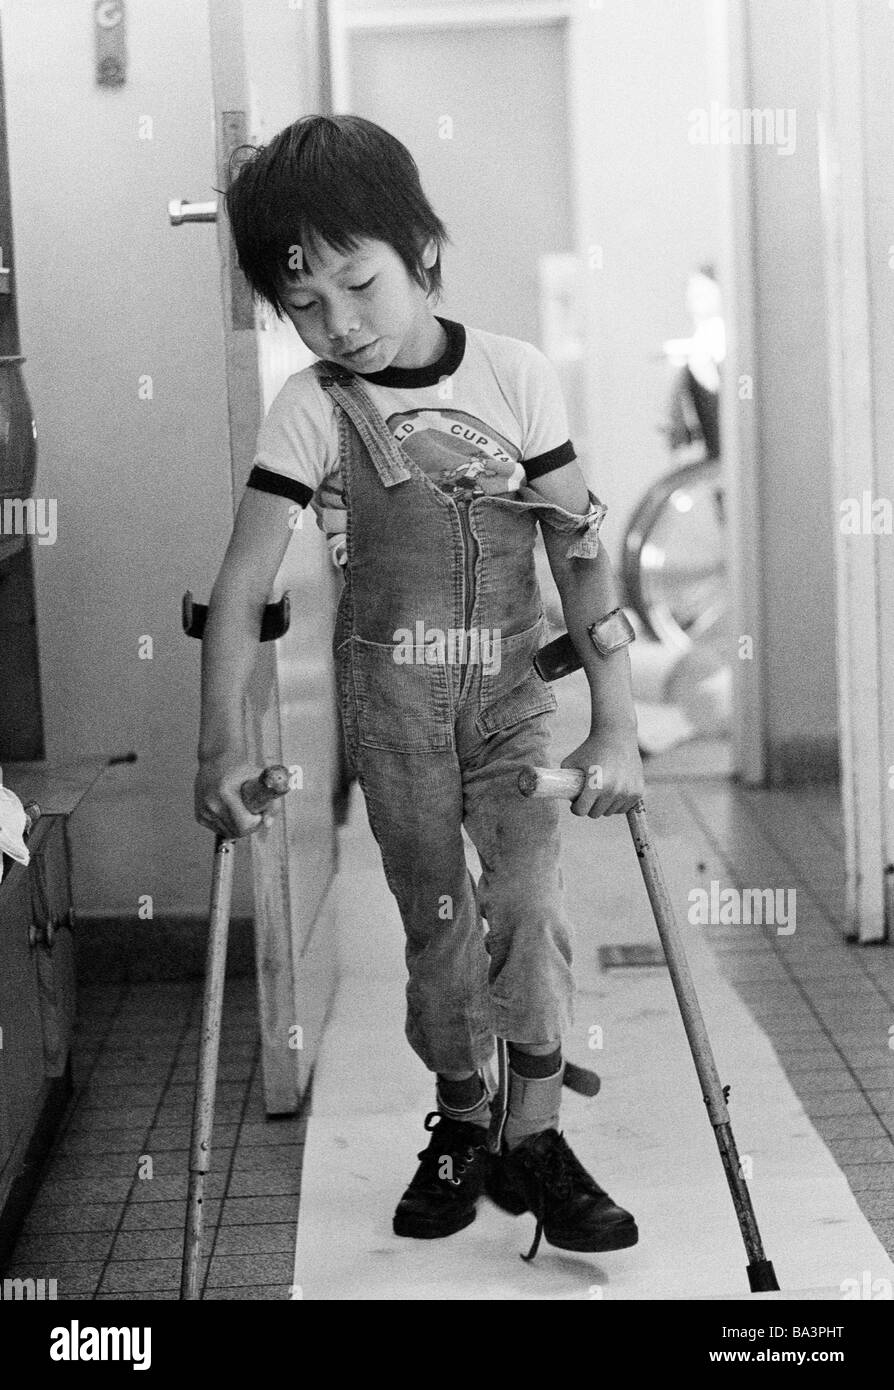 Seventies, black and white photo, people, physical handicap, a boy from Vietnam walks with crutches, aged 6 to 10 years, Tan, Special School Alsbachtal, D-Oberhausen, D-Oberhausen-Sterkrade, Ruhr area, North Rhine-Westphalia Stock Photo